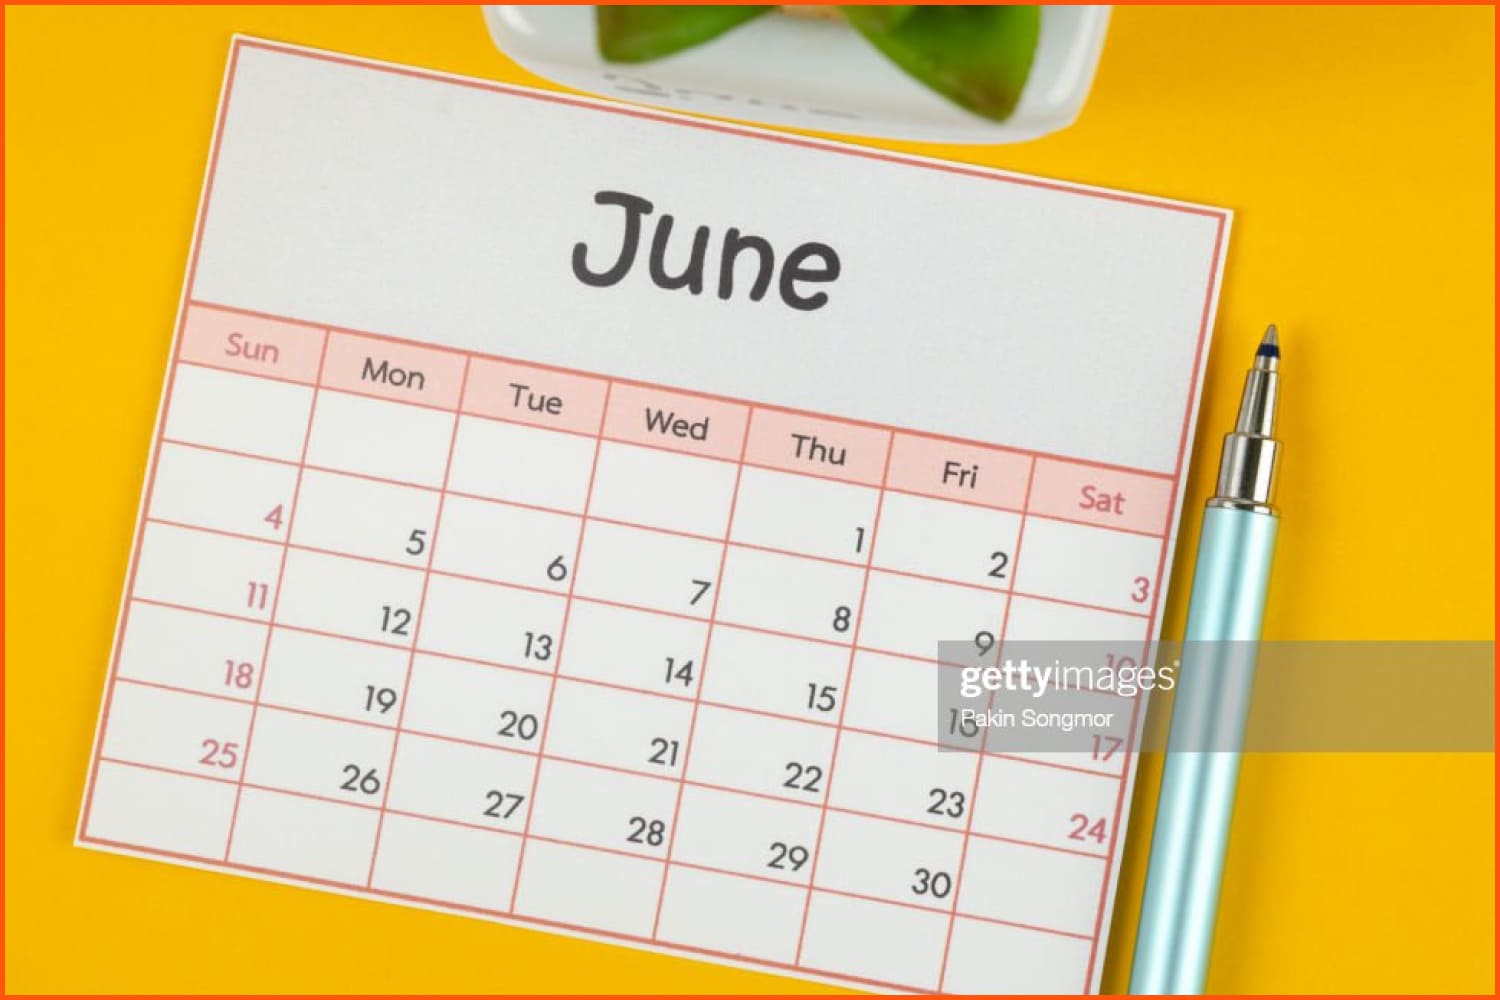 June calendar and a pen next to it on a yellow table.